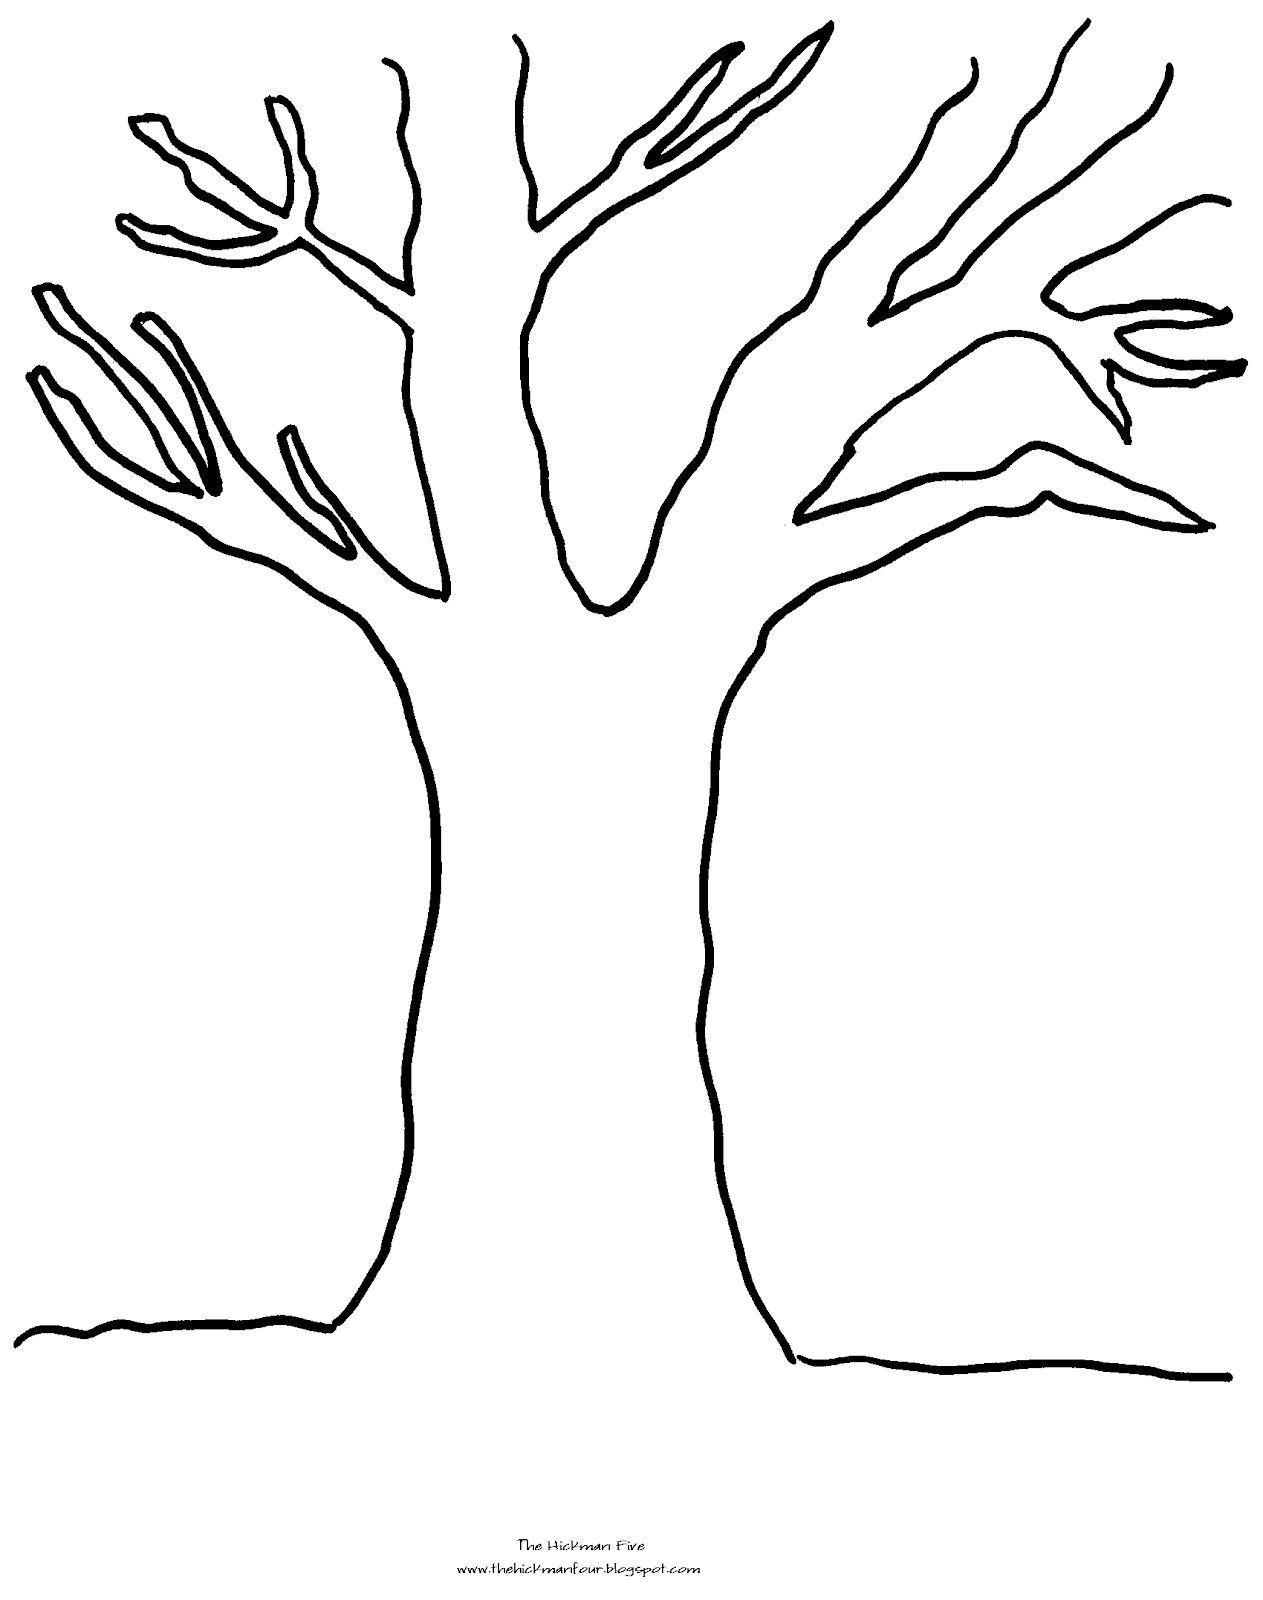 Tree Without Leaves Coloring Page | Free Coloring Pages on Masivy ...